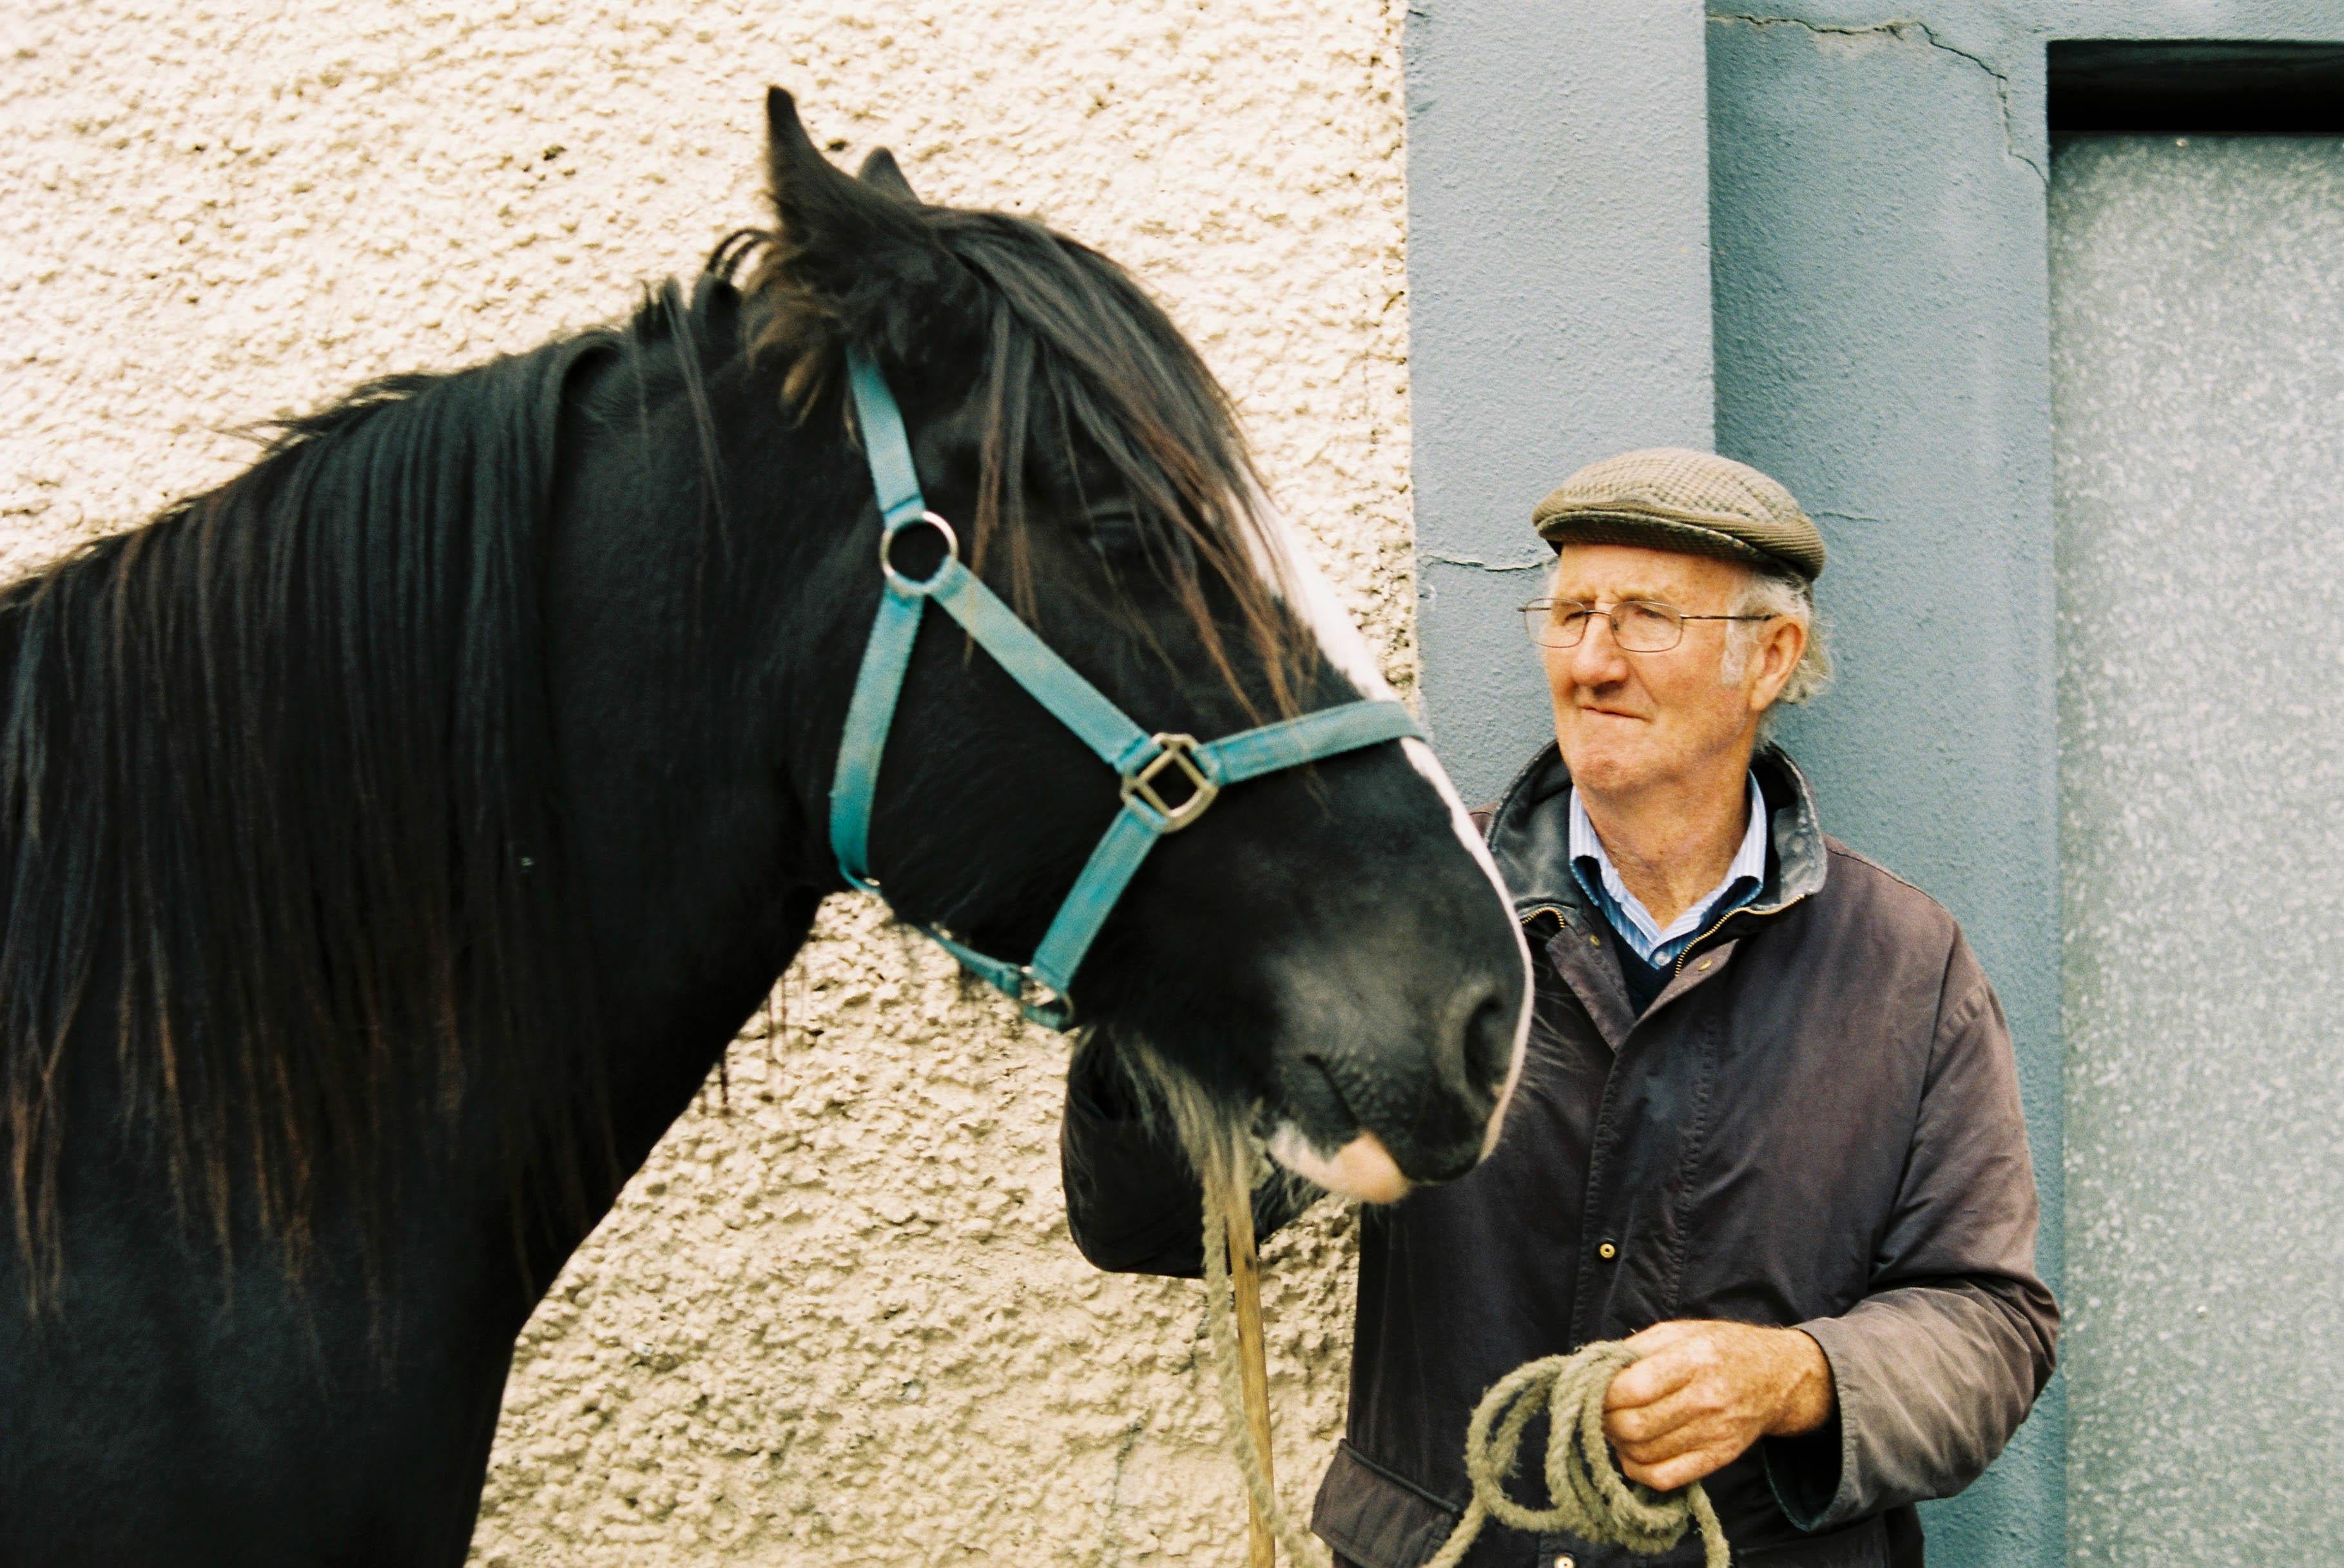 Shot on 35mm film using a Fujica 605STN. Each print will be artist-signed and posted from Dublin, Ireland with a Certificate of Authentication. This is part of a horse photography series shot at Ireland's Ballinasloe horse fair, the oldest horse